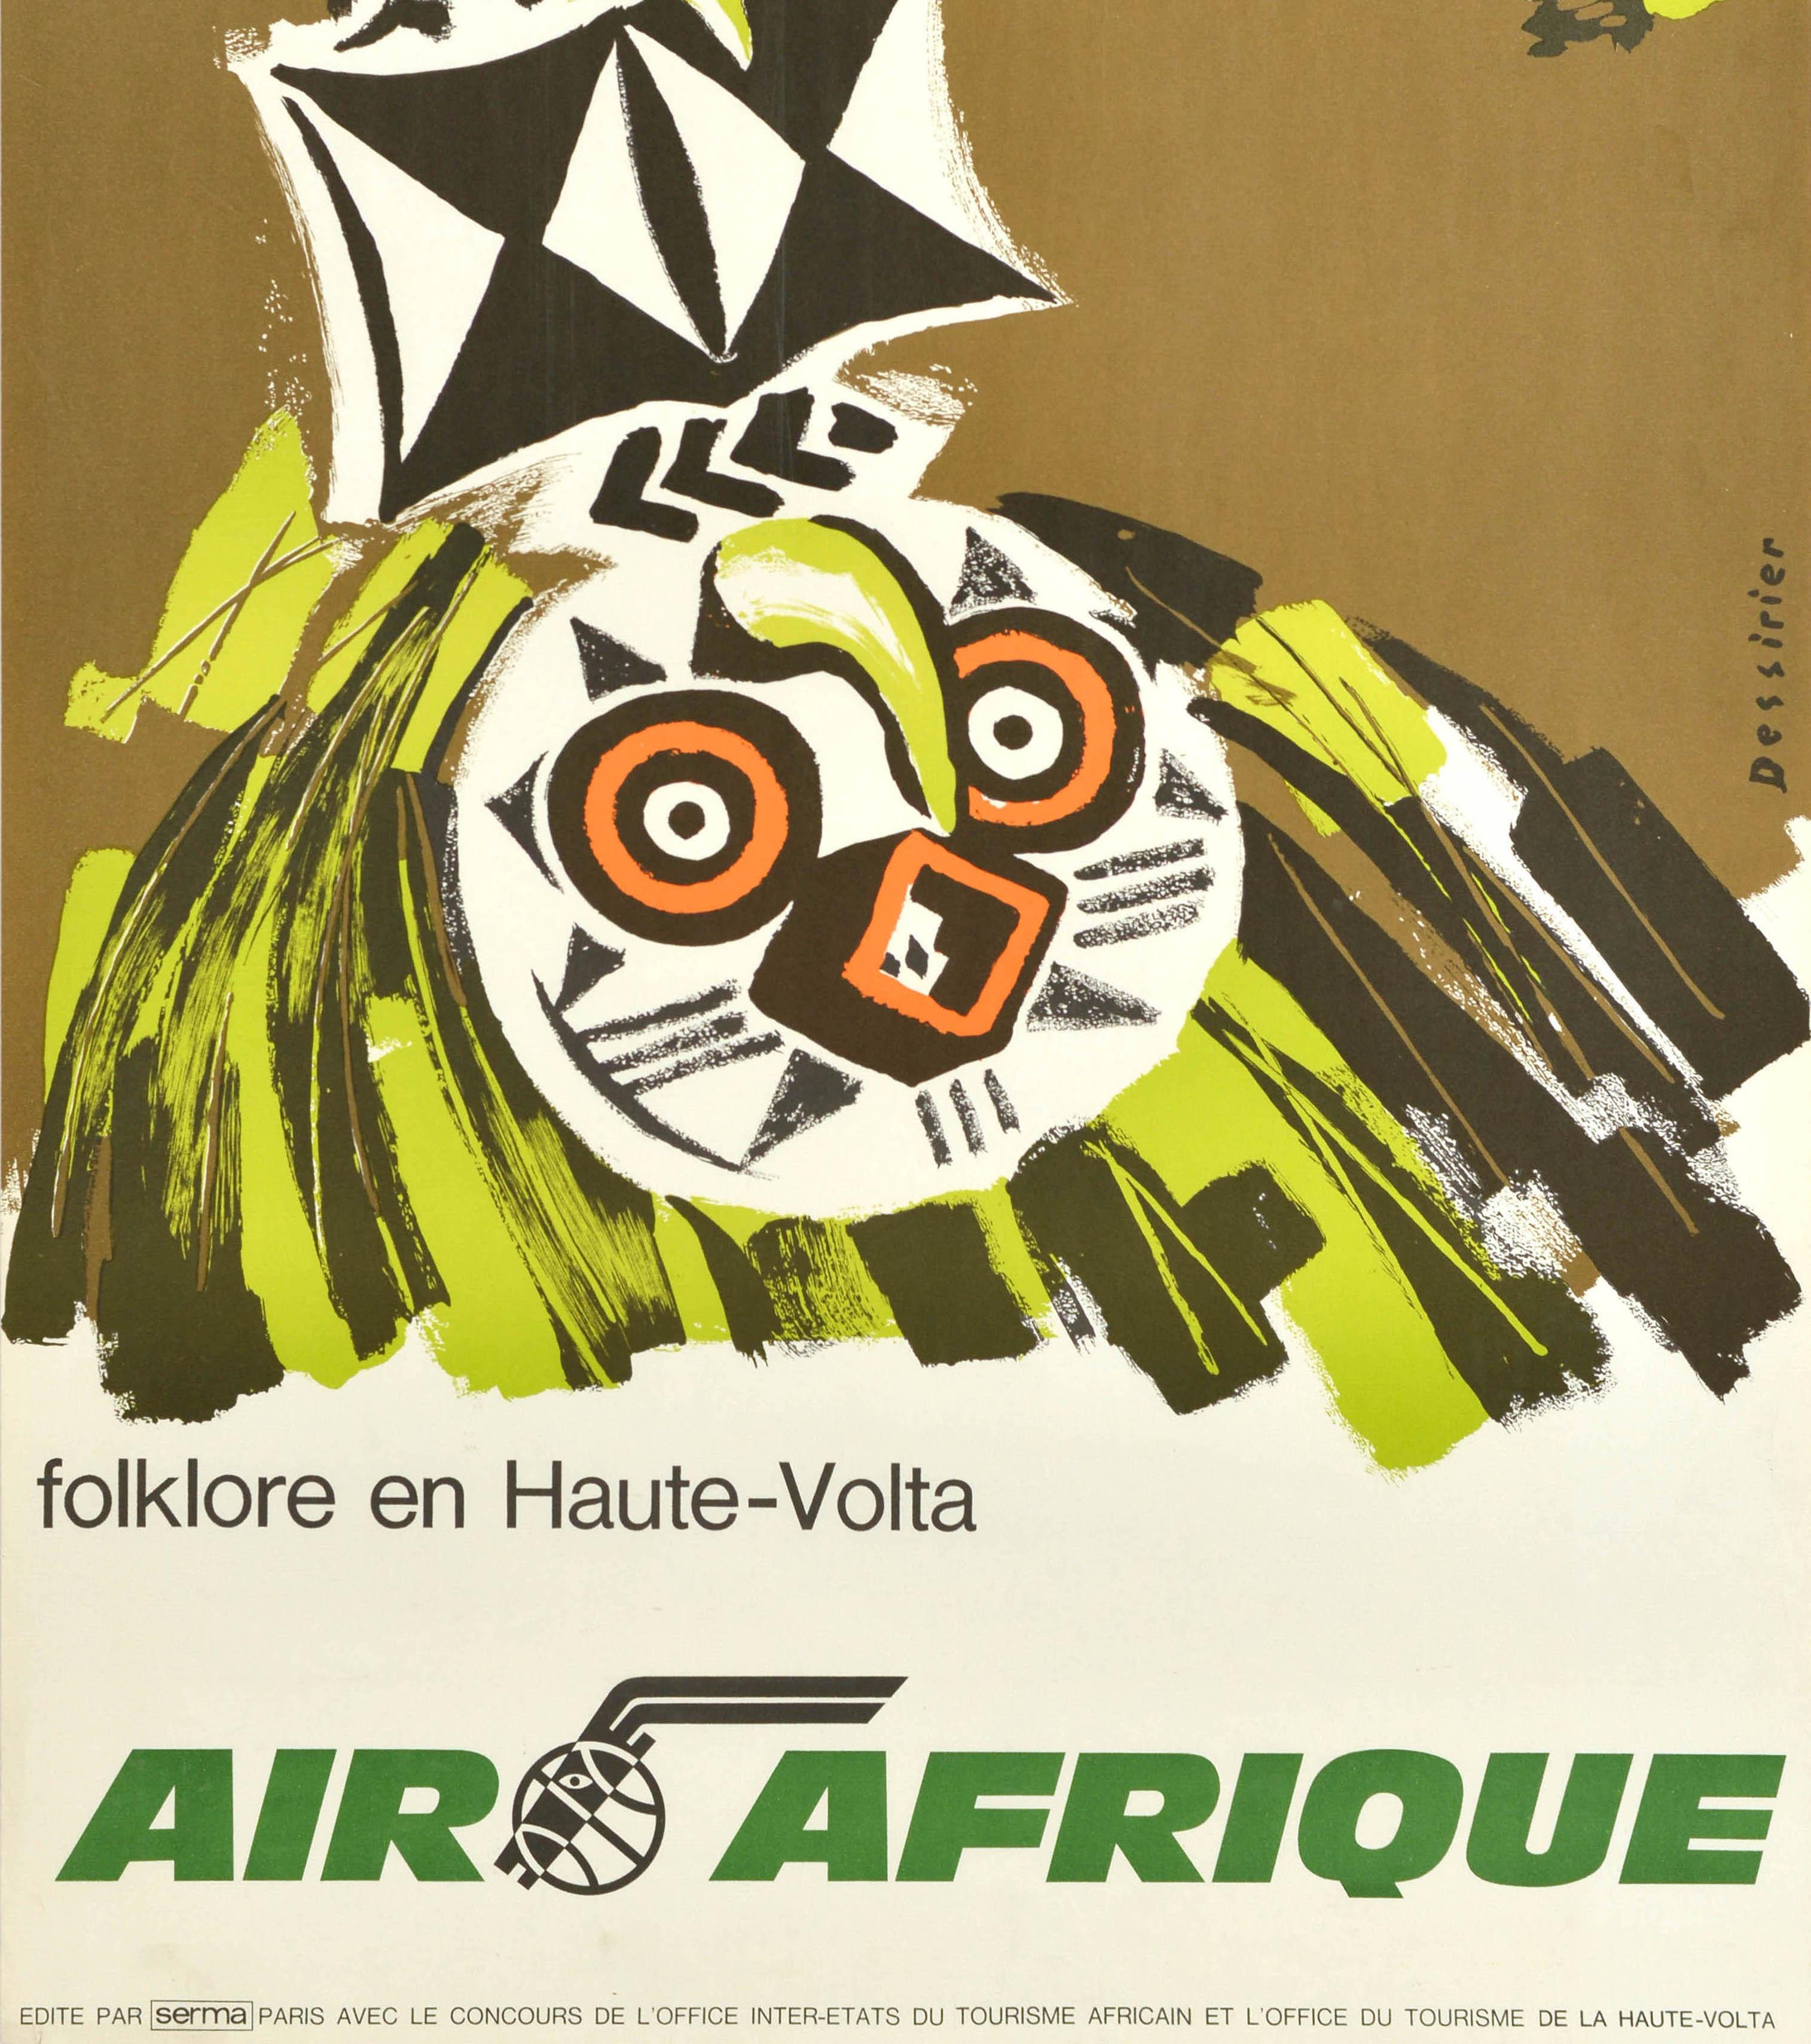 Original vintage travel poster - Air Afrique folklore en Haute-Volta / Air Africa folklore of Upper Volta - featuring an image of a traditional carved wooden totem style mask face with black and white triangle shapes and an illustration of an